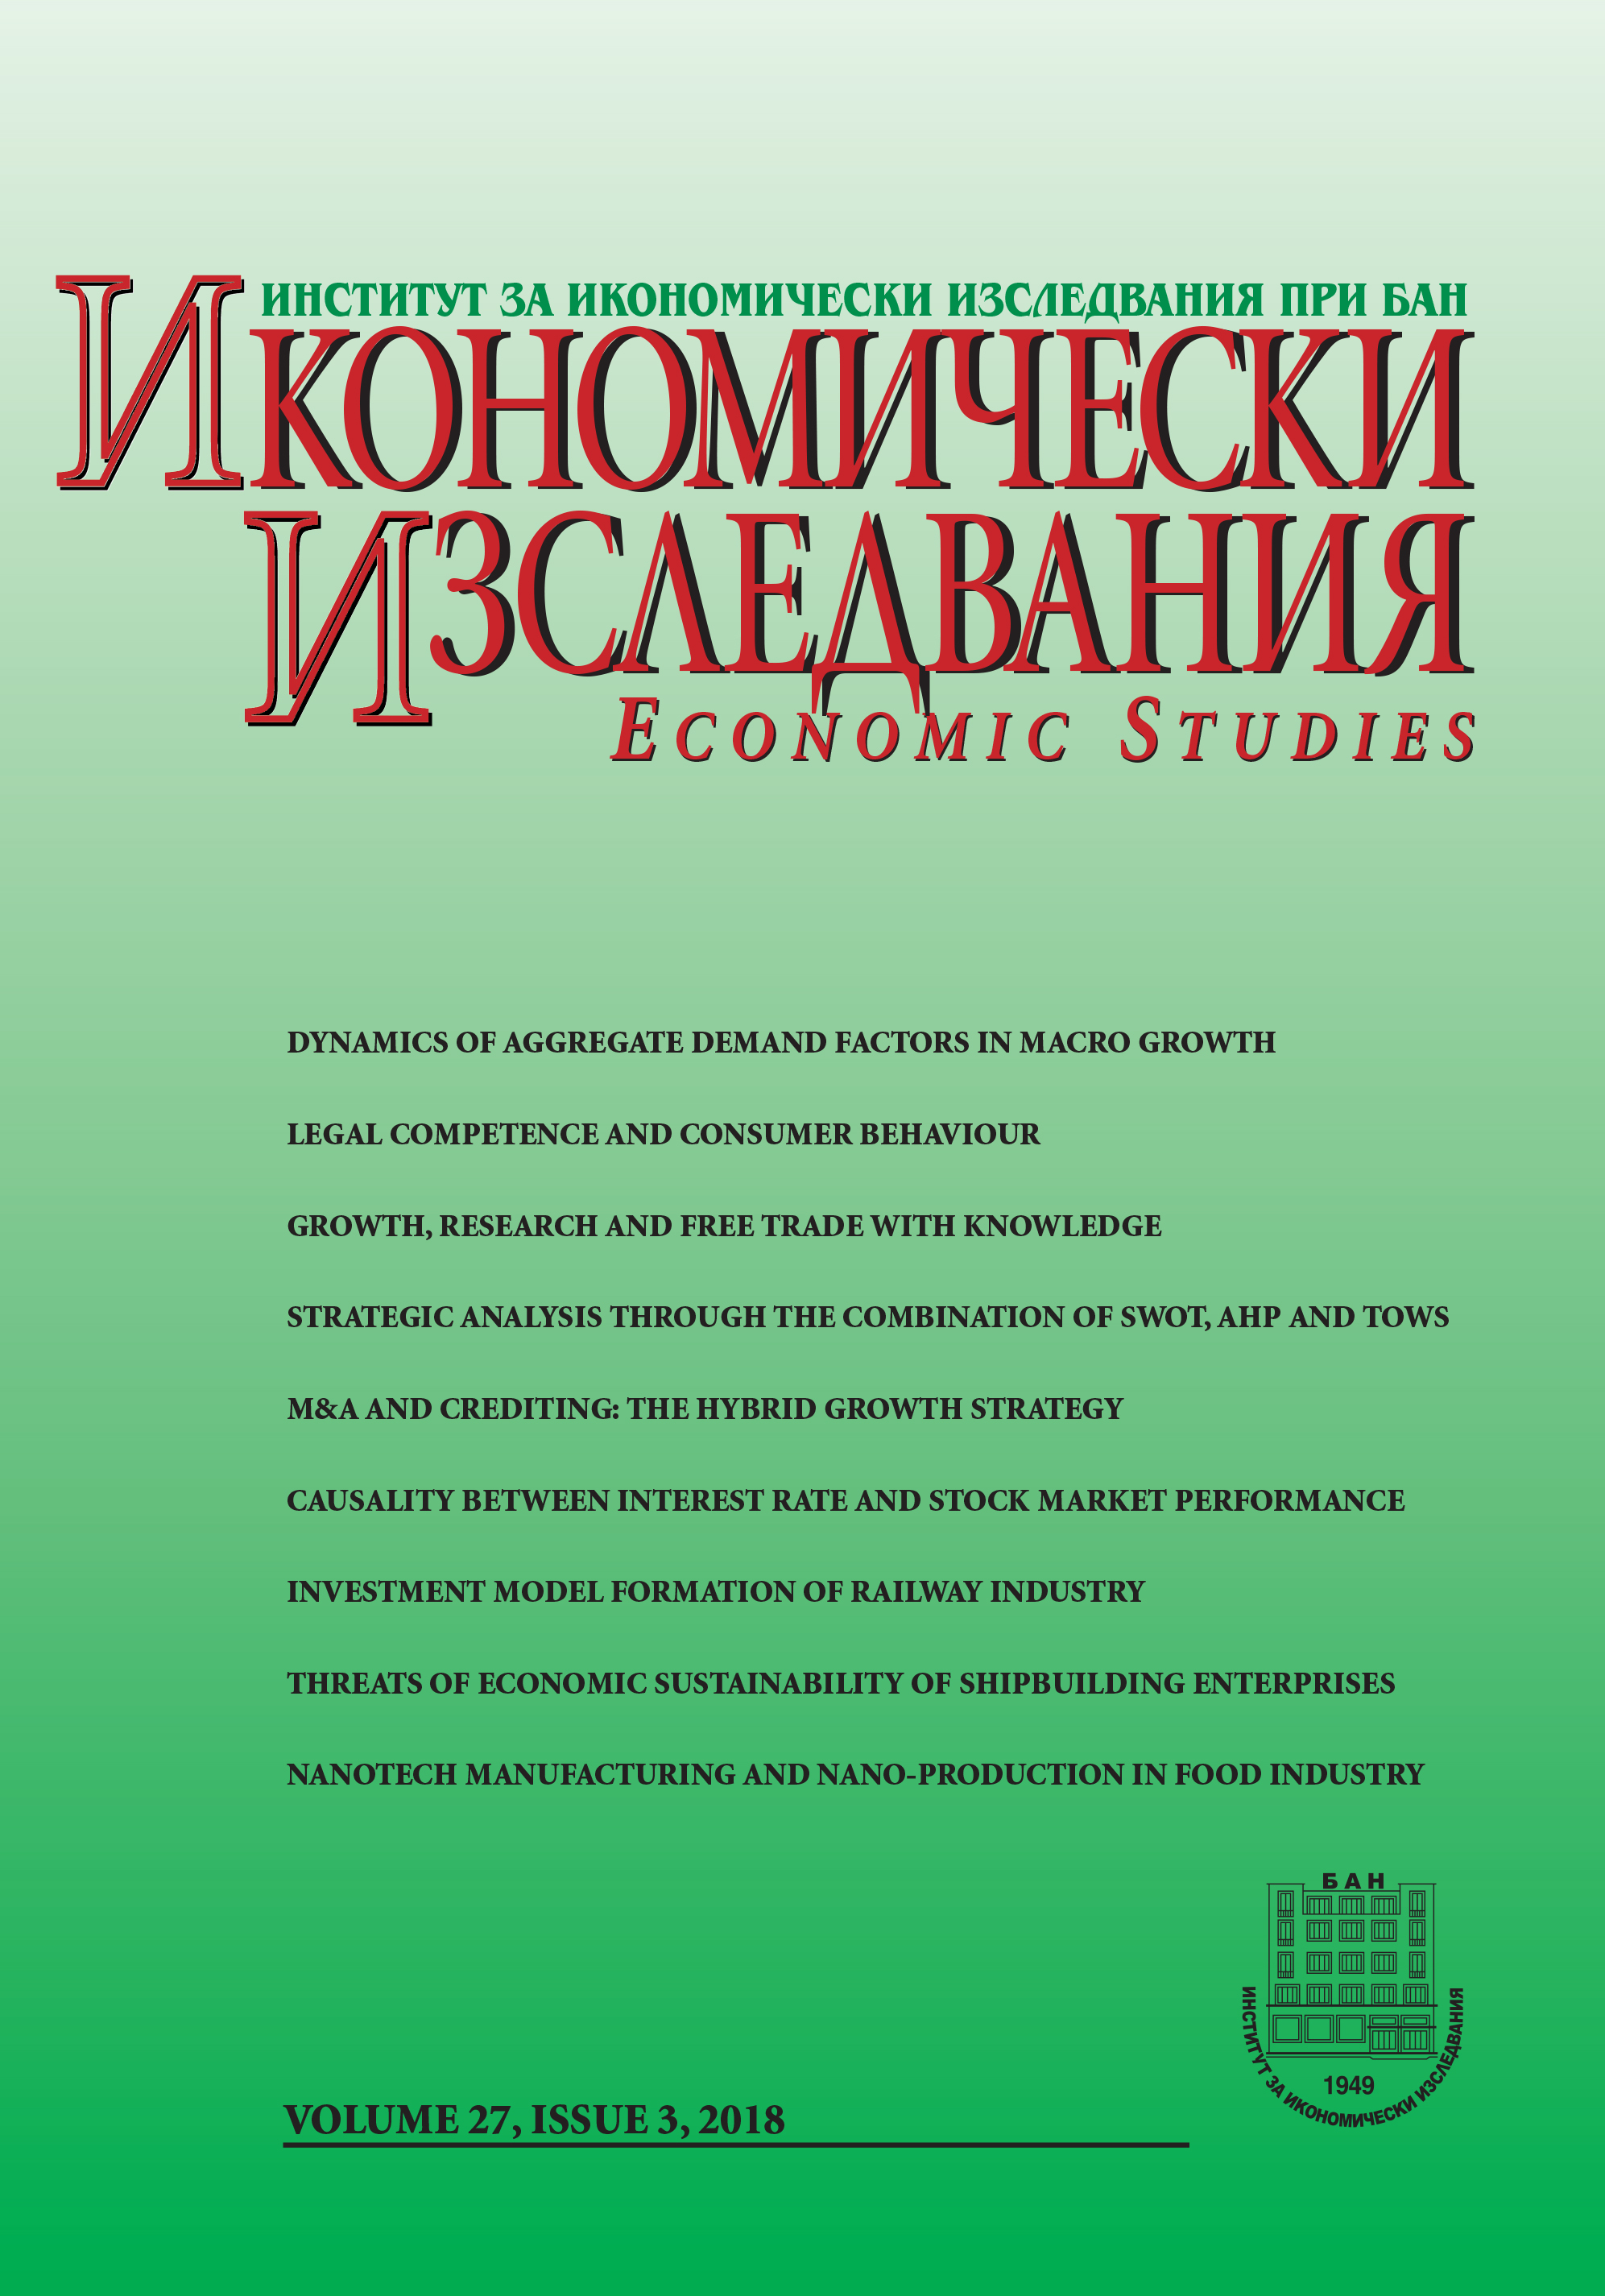 The Investment Model Formation of Railway Industry Development in Ukraine in the Conditions of Eurointegration Cover Image